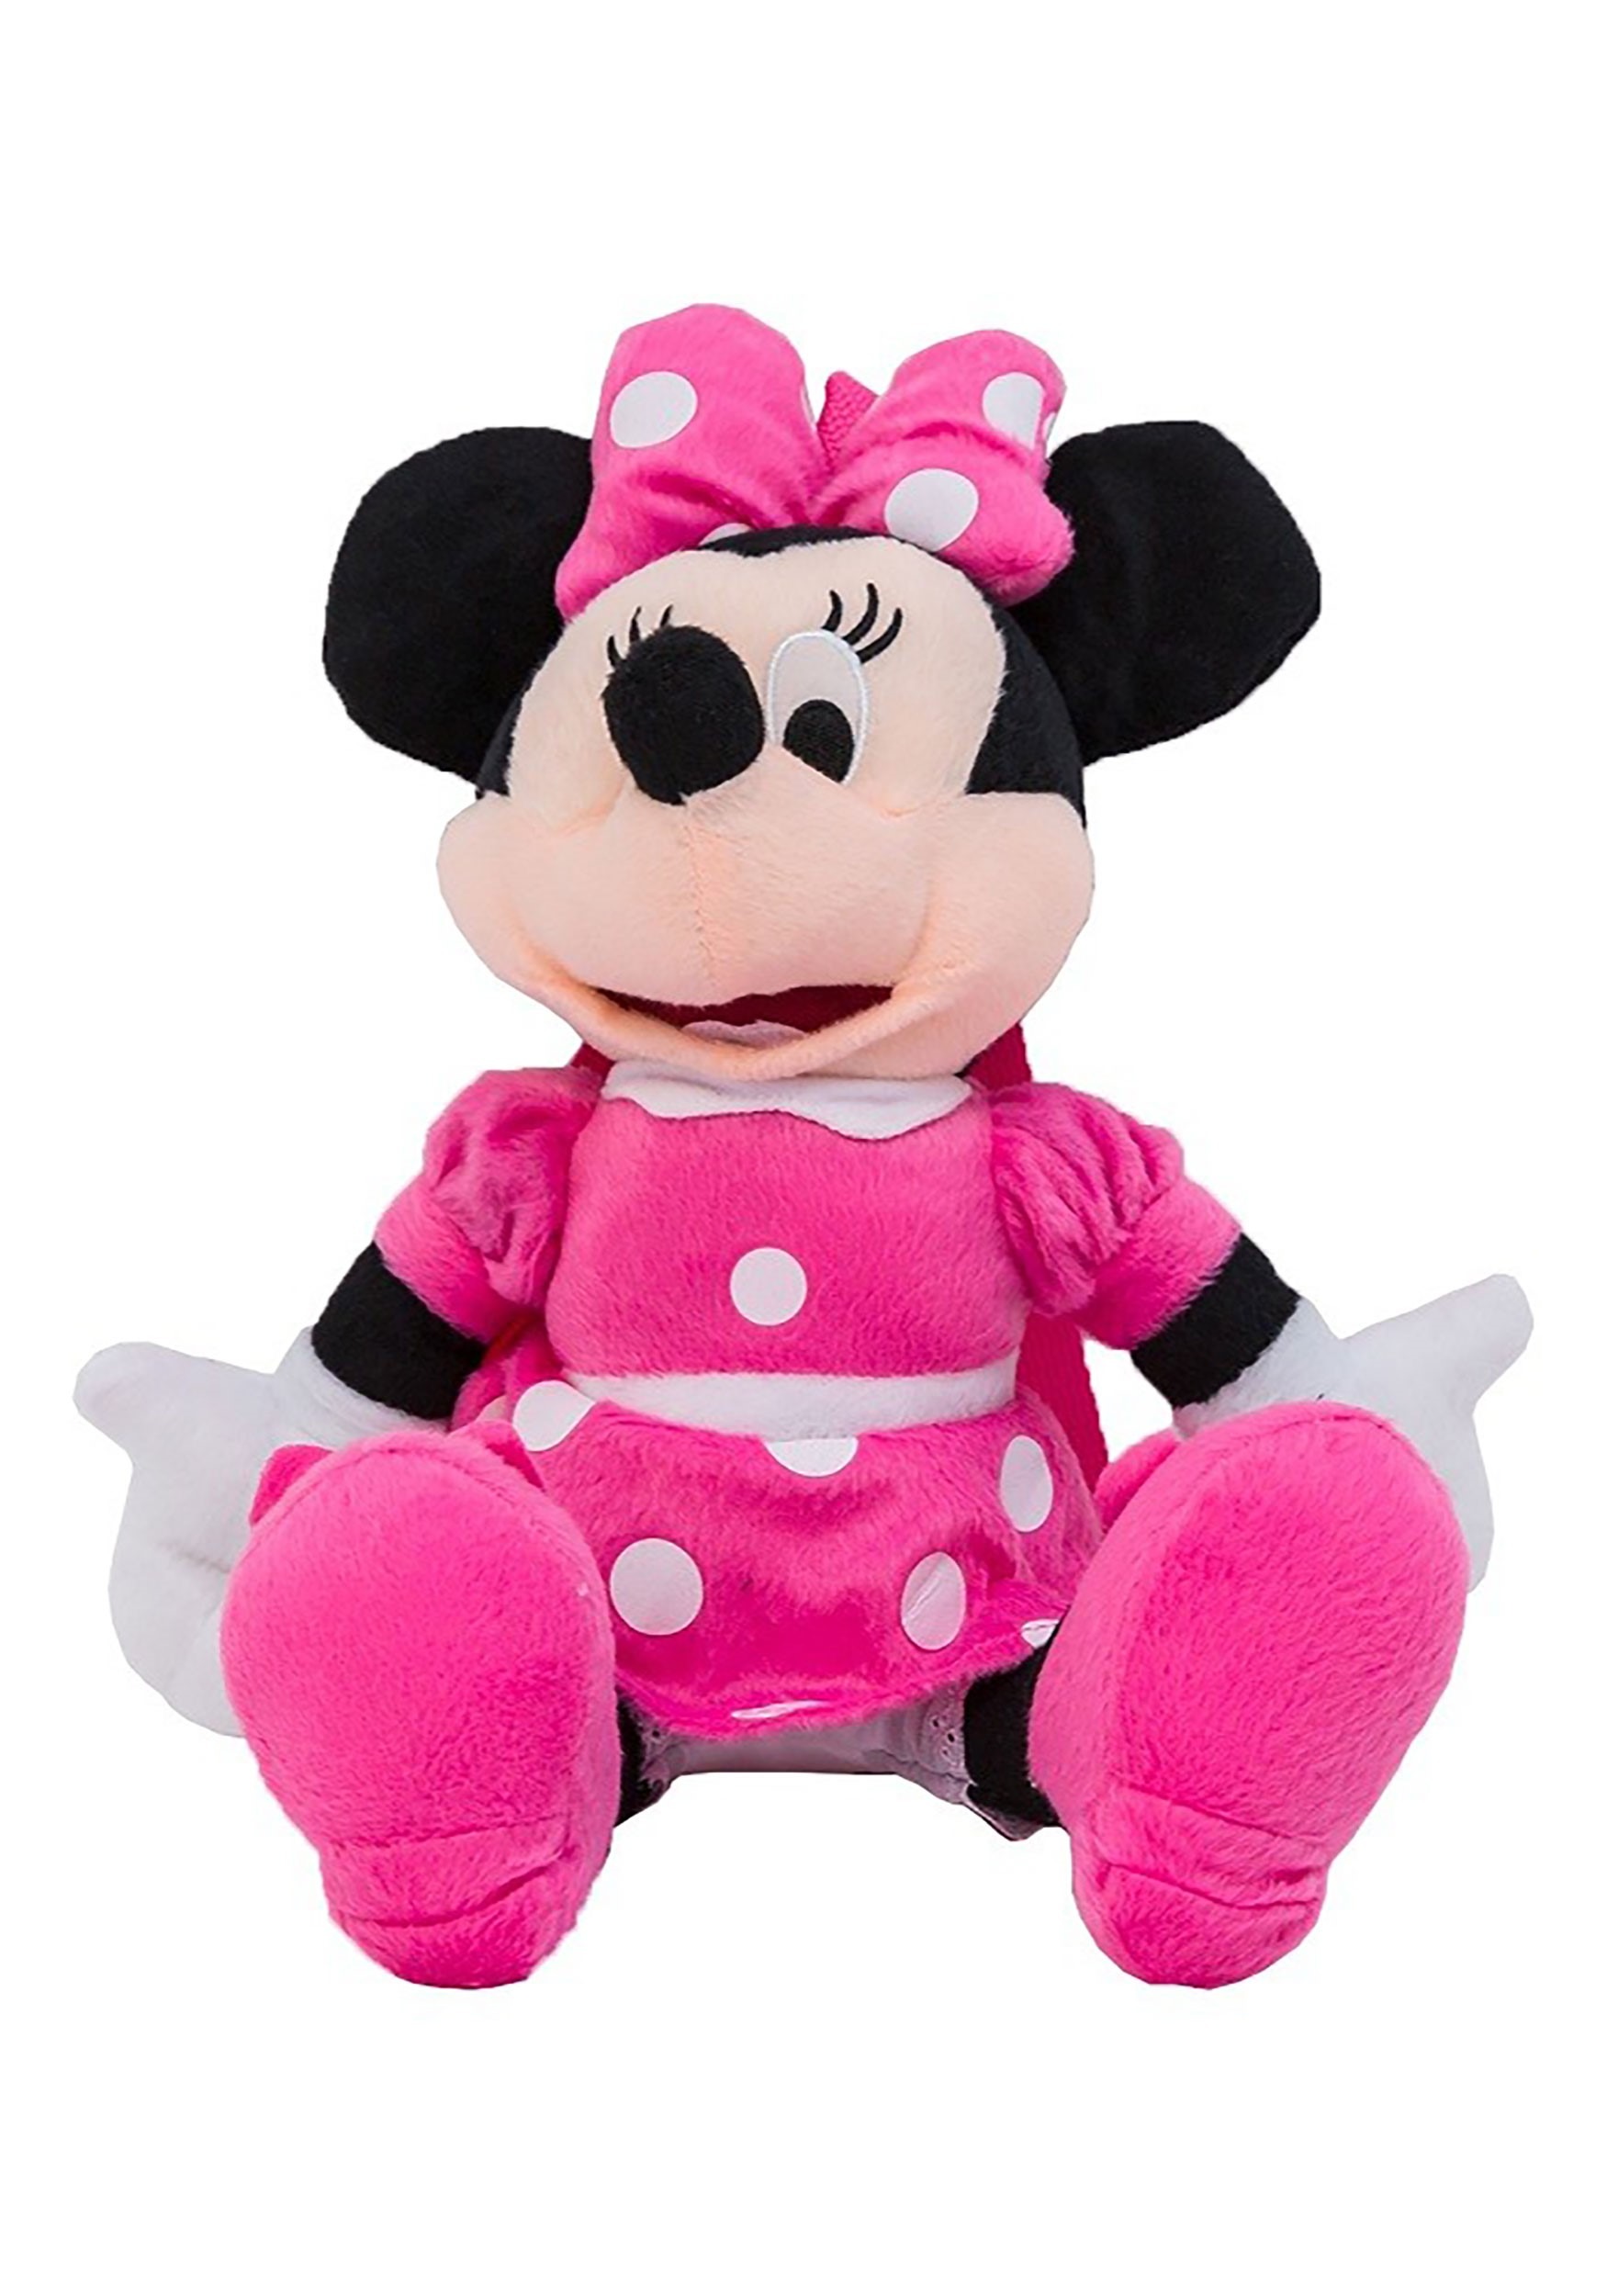 Plush Backpack Disney Minnie Mouse